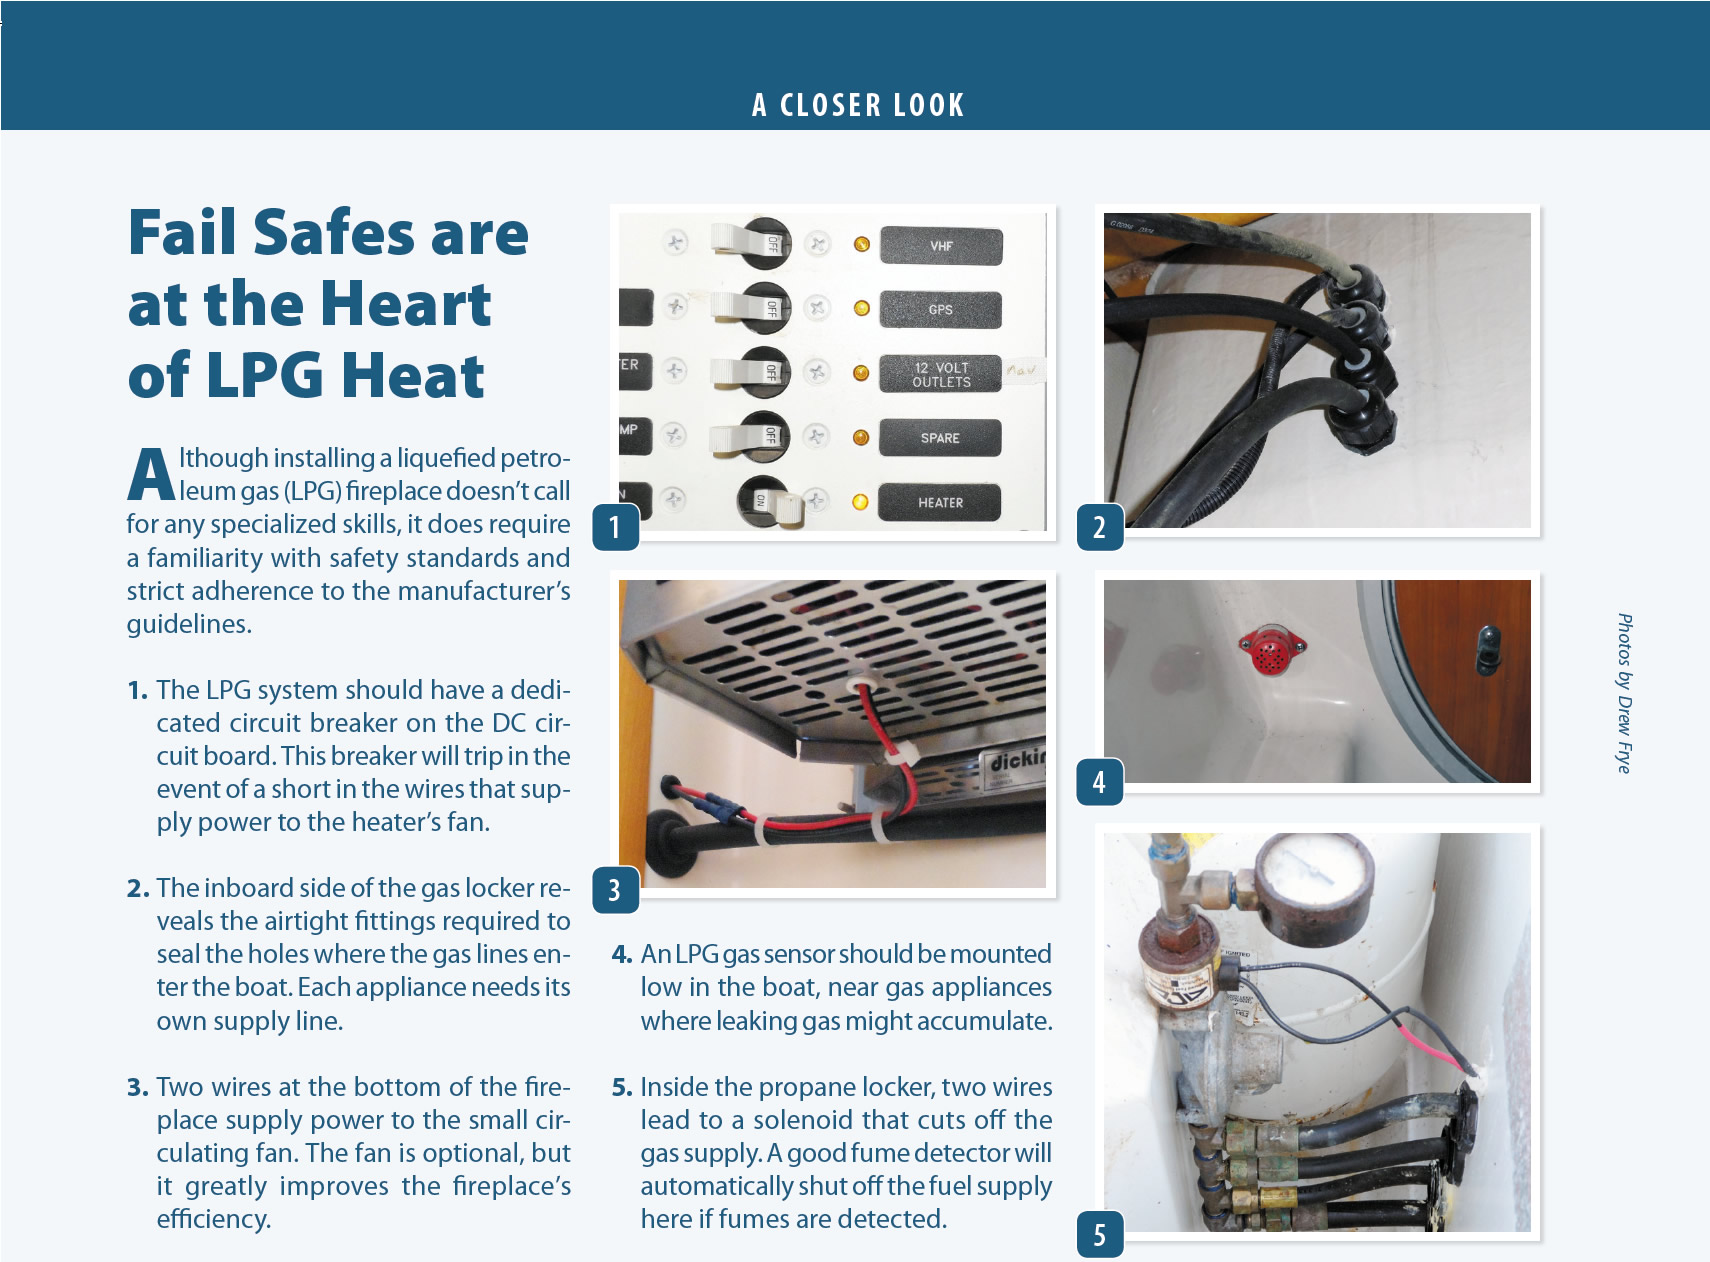 Playing it Safe with LPG Heat